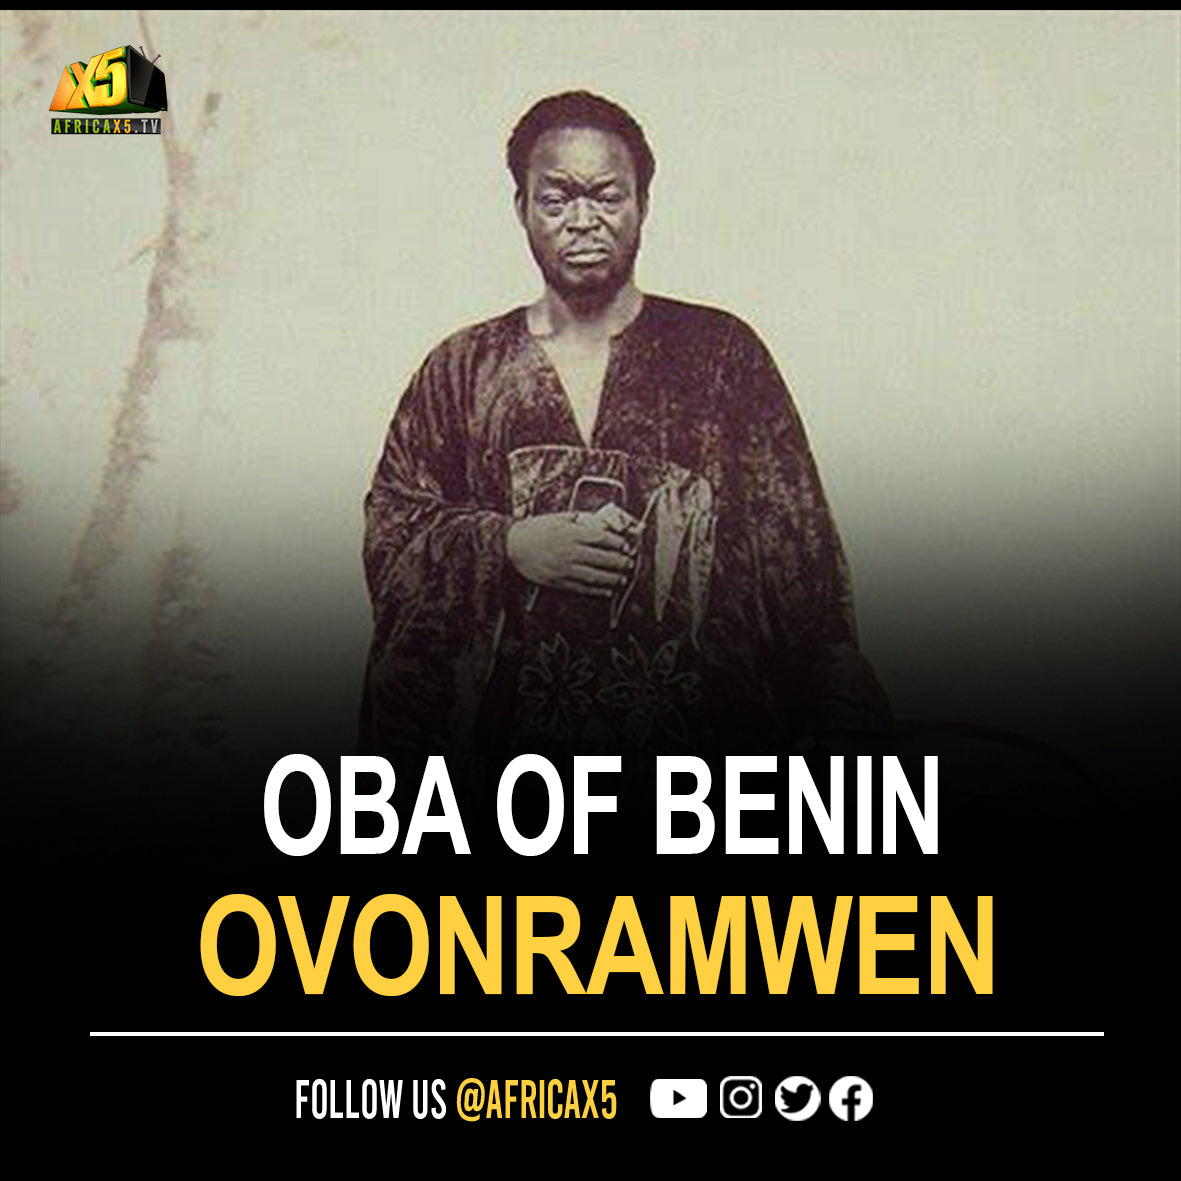 The Story of the Oba of Benin Who Was Exiled to Calabar by the British  Oba Ovonramwen Nogbaisi